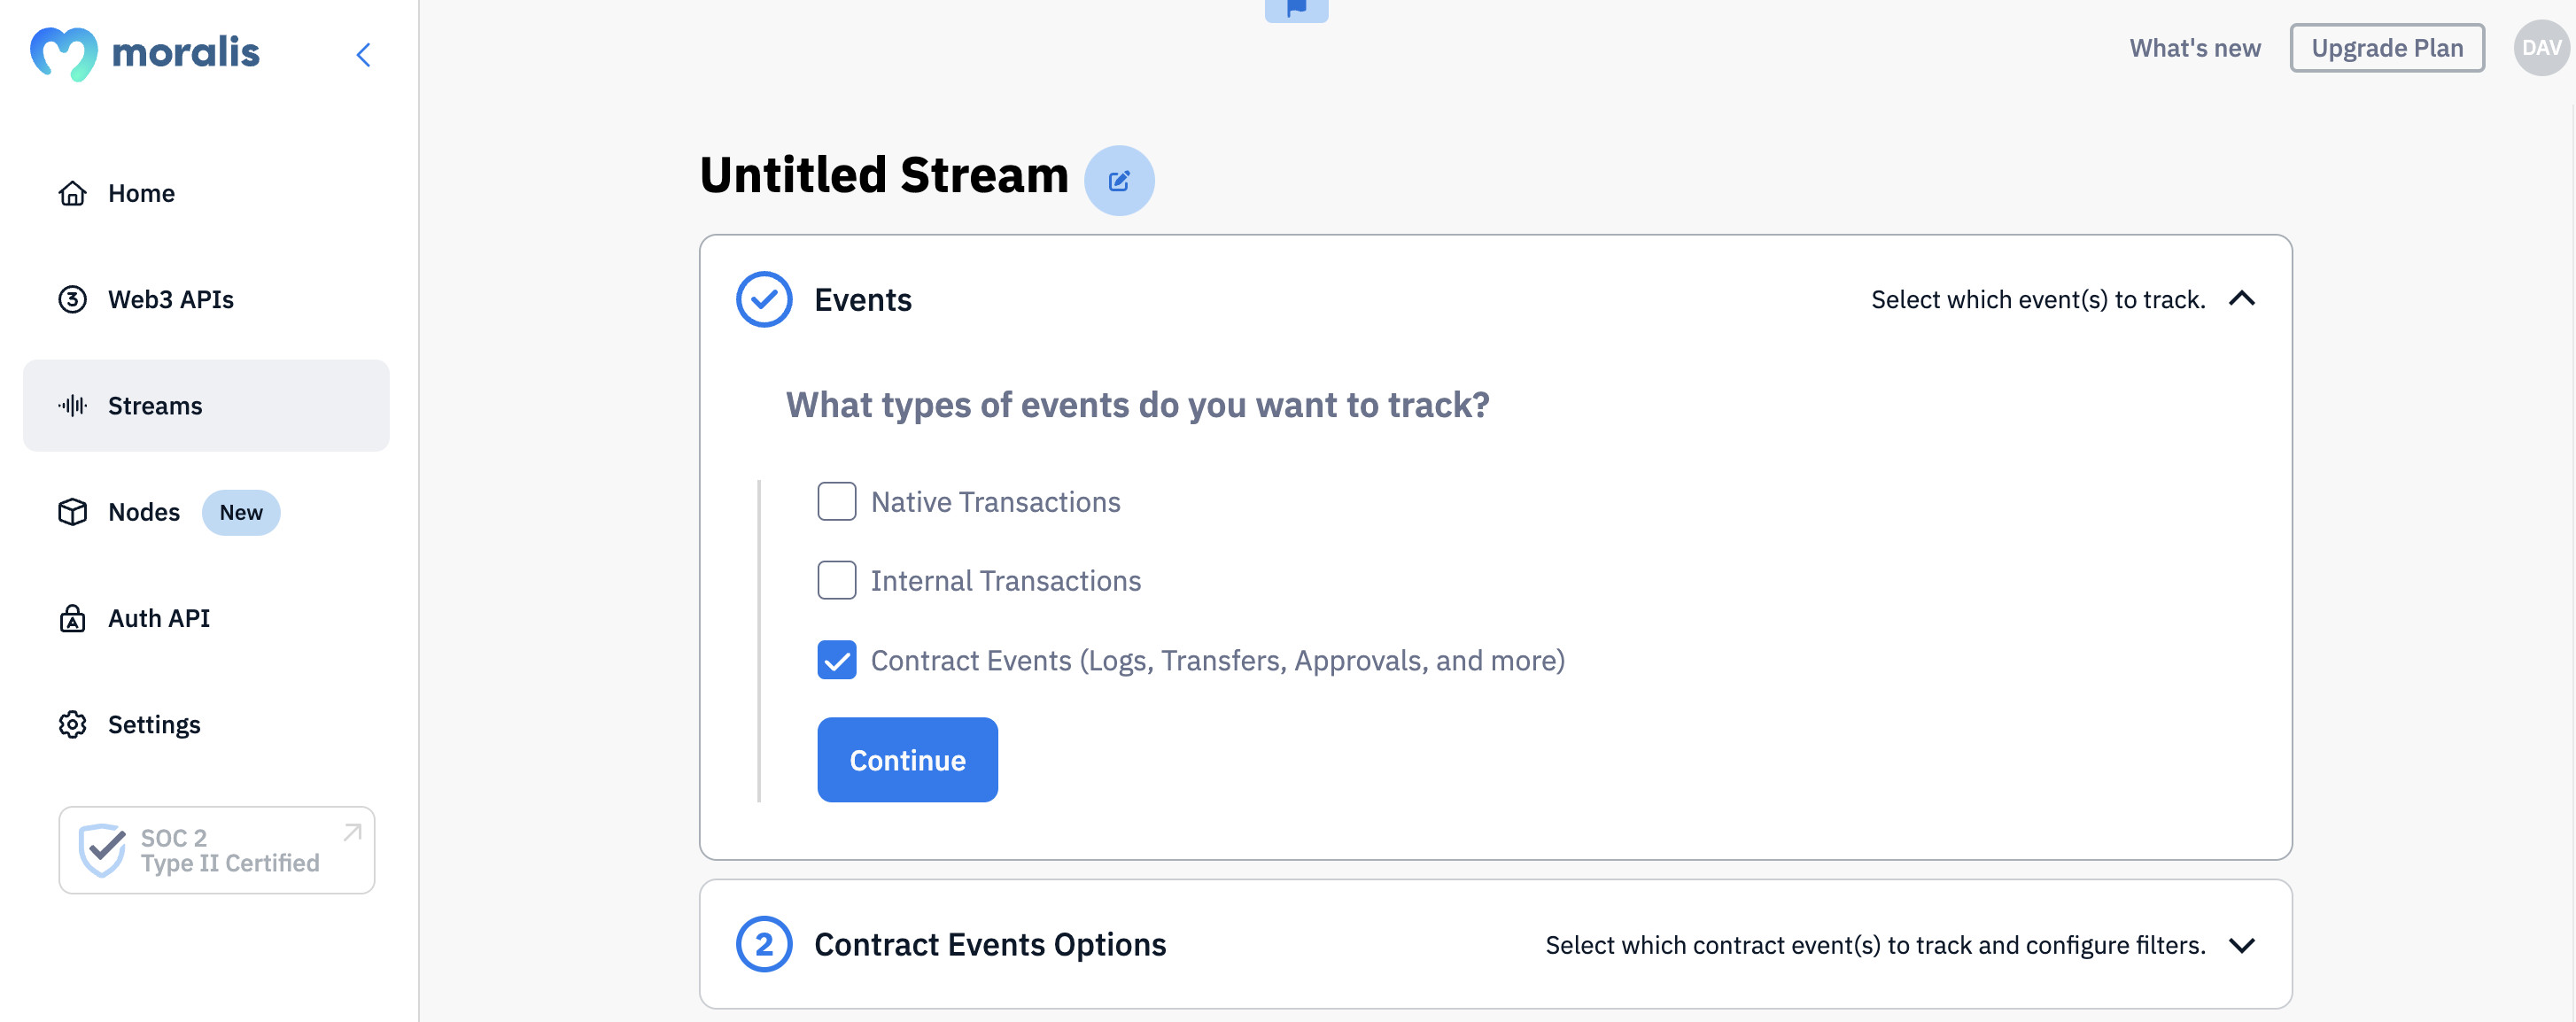 Step 2 - Name your stream and select the types of events you wish to monitor. In our case, we’ll simply choose ”Contract Events”: 